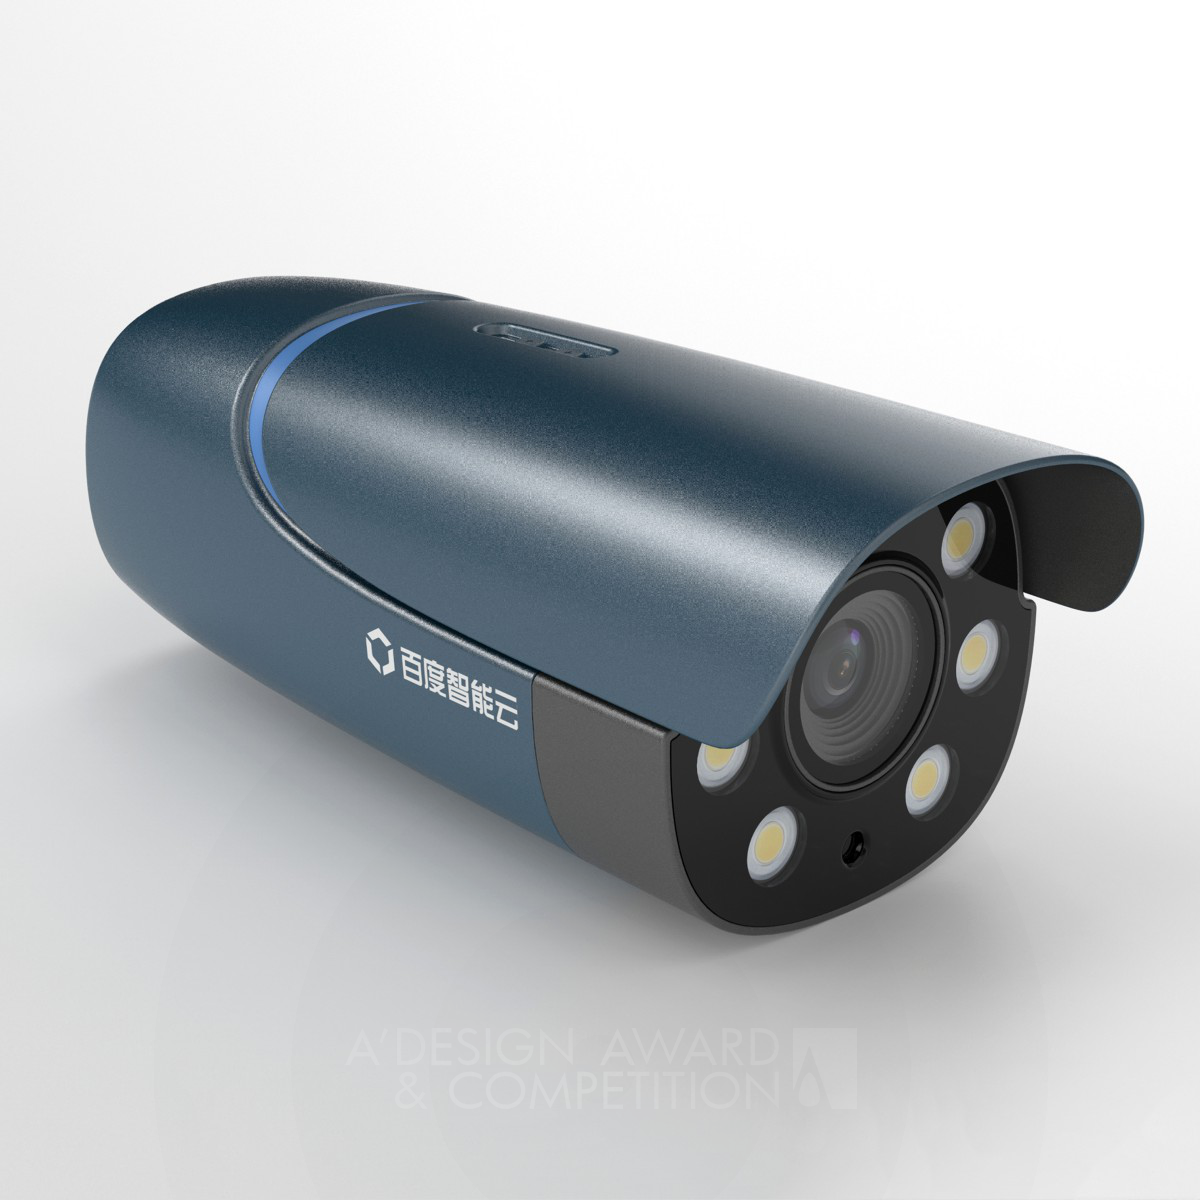 FC100 Face Recognition Camera